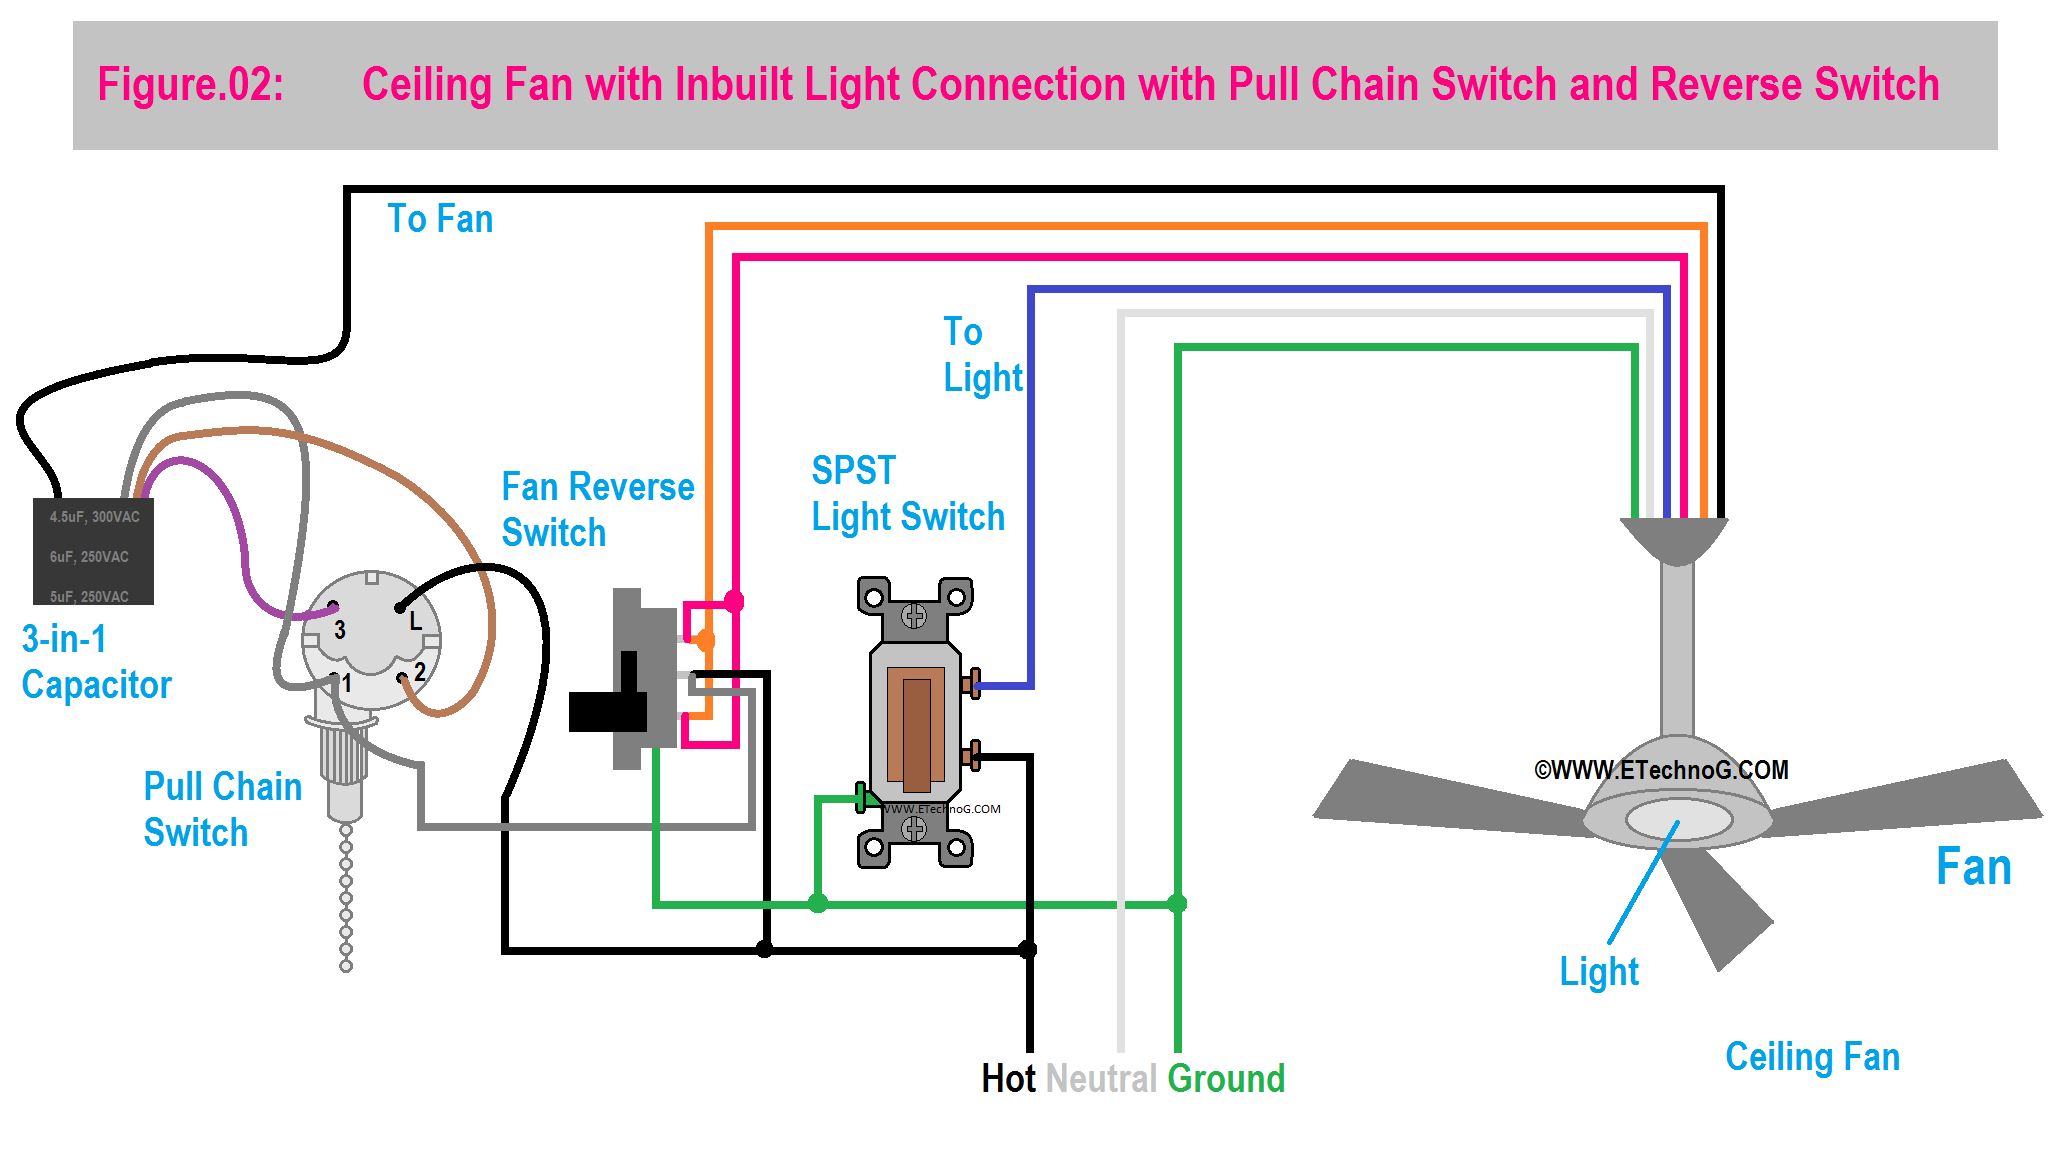 Ceiling Fan with Inbuilt Light Connection with Pull Chain Switch and Reverse Switch